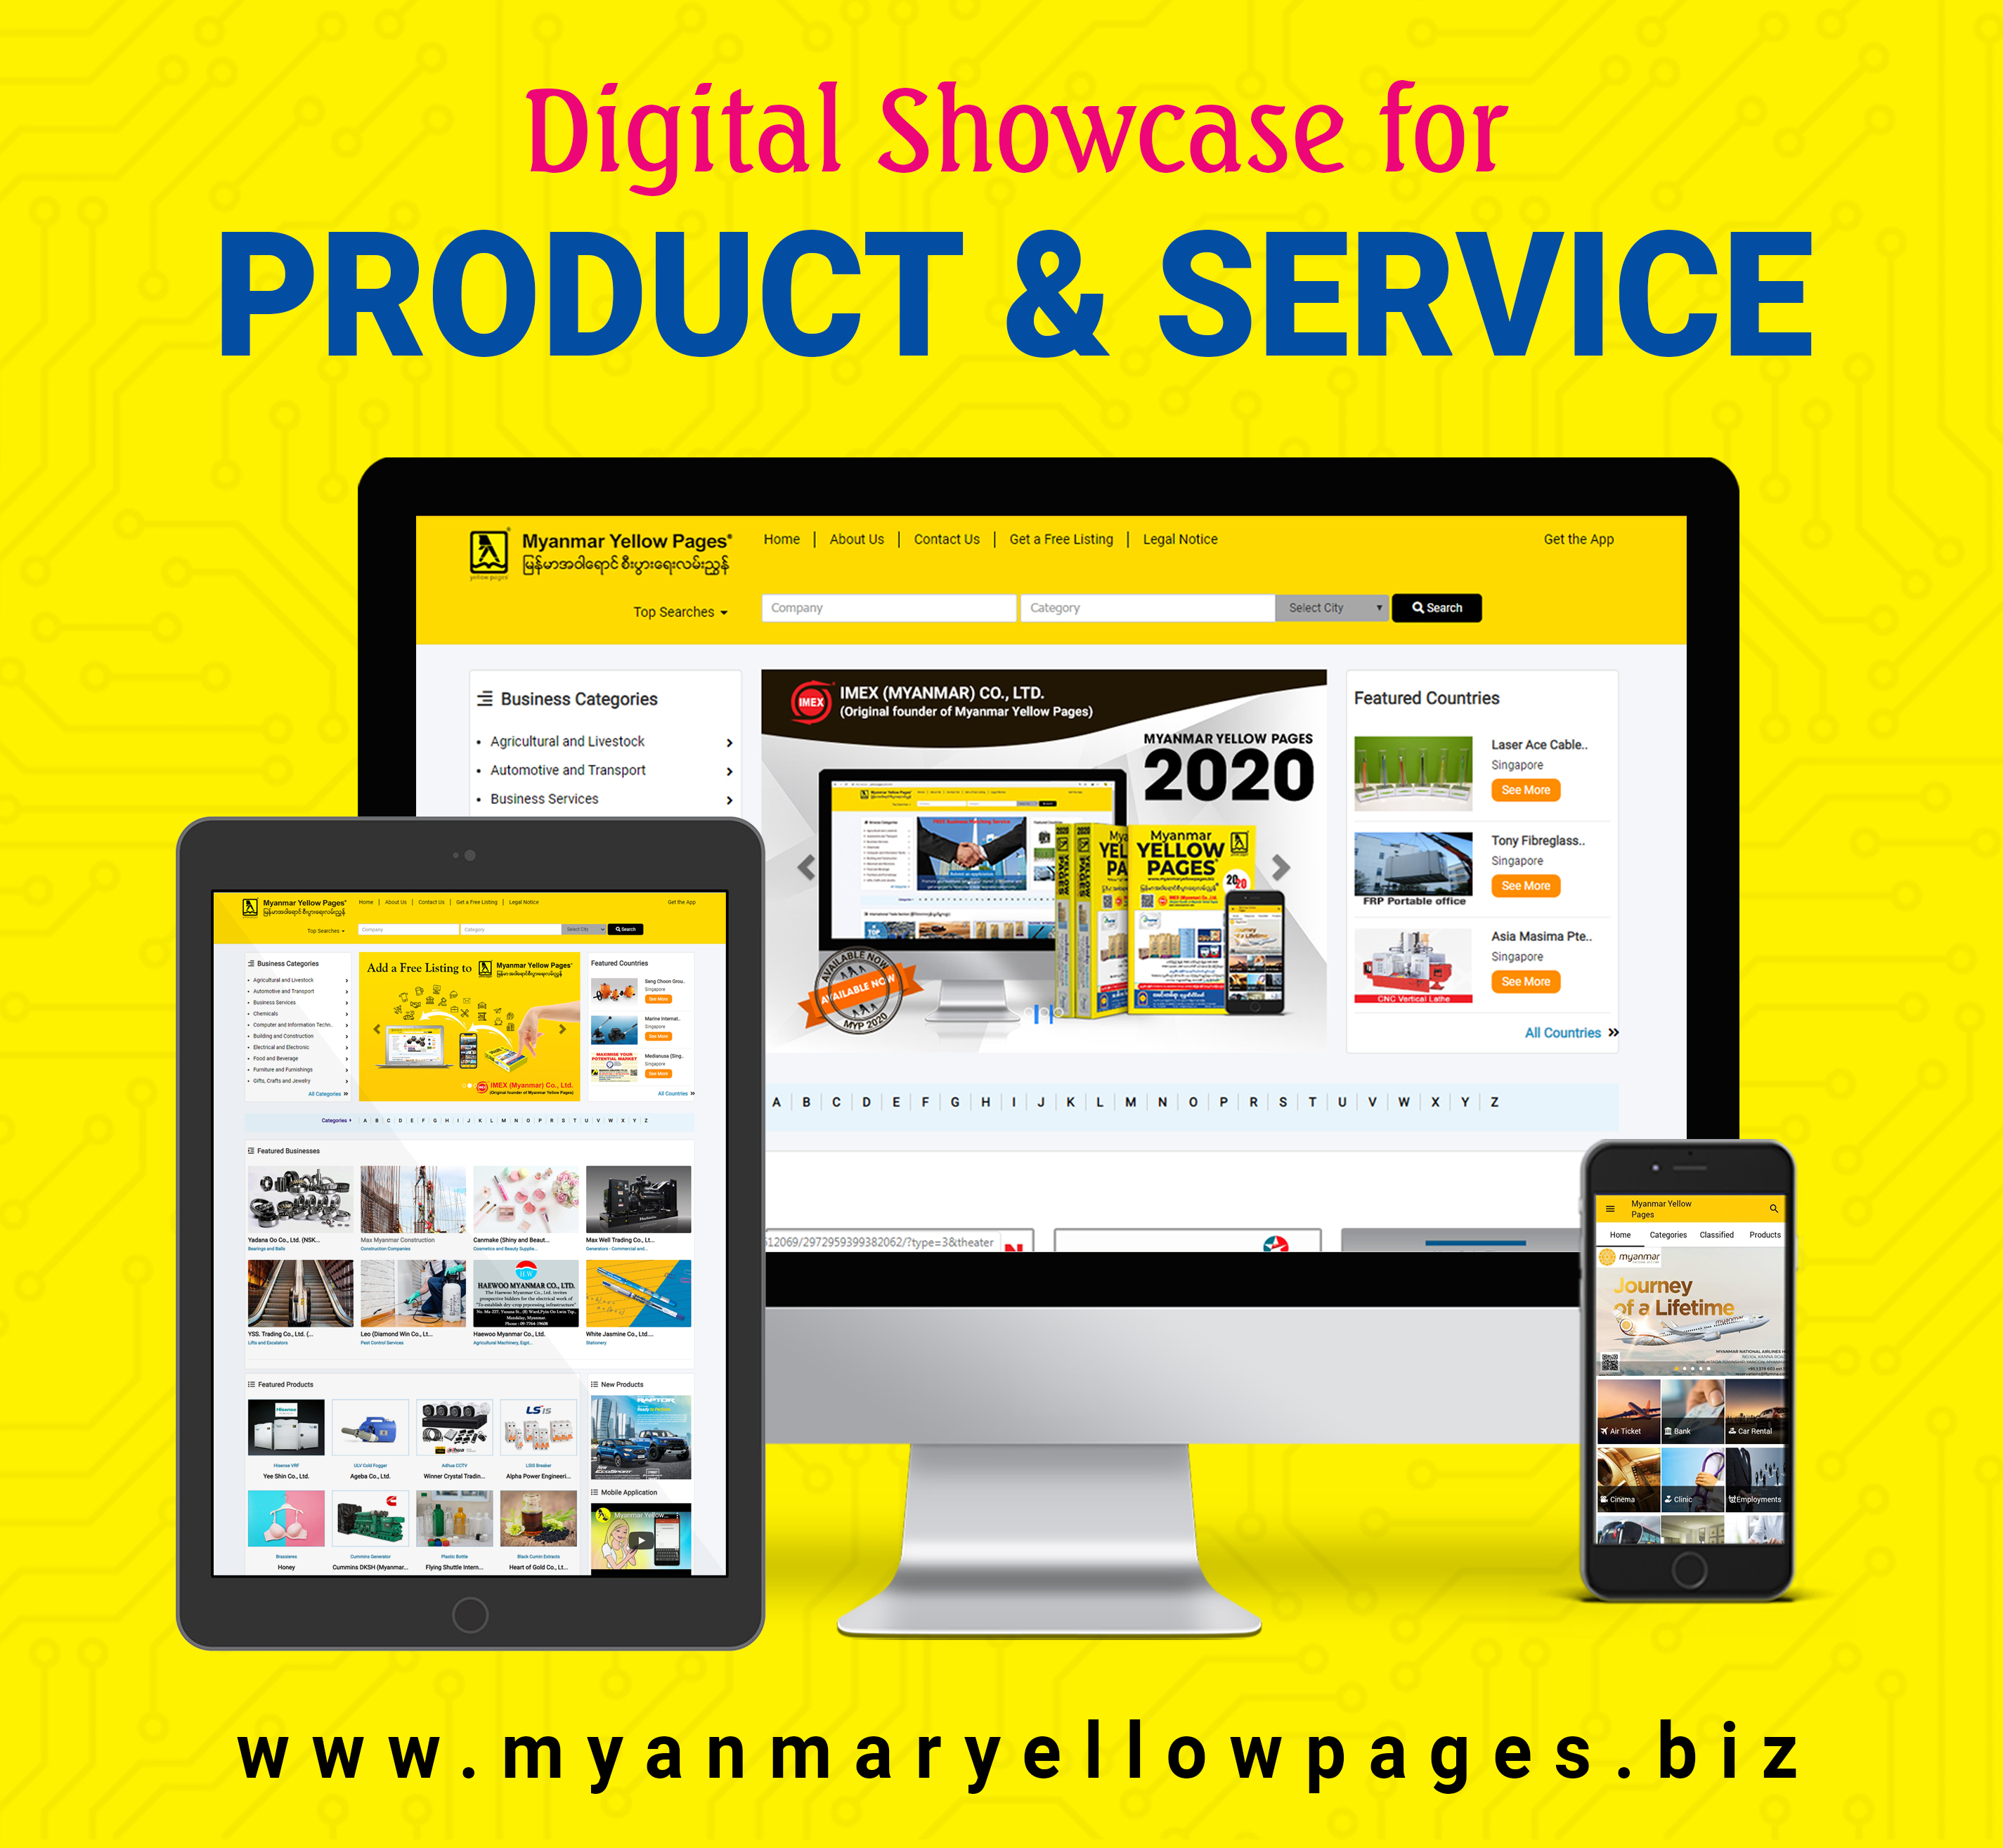 Myanmar Yellow Pages | Business